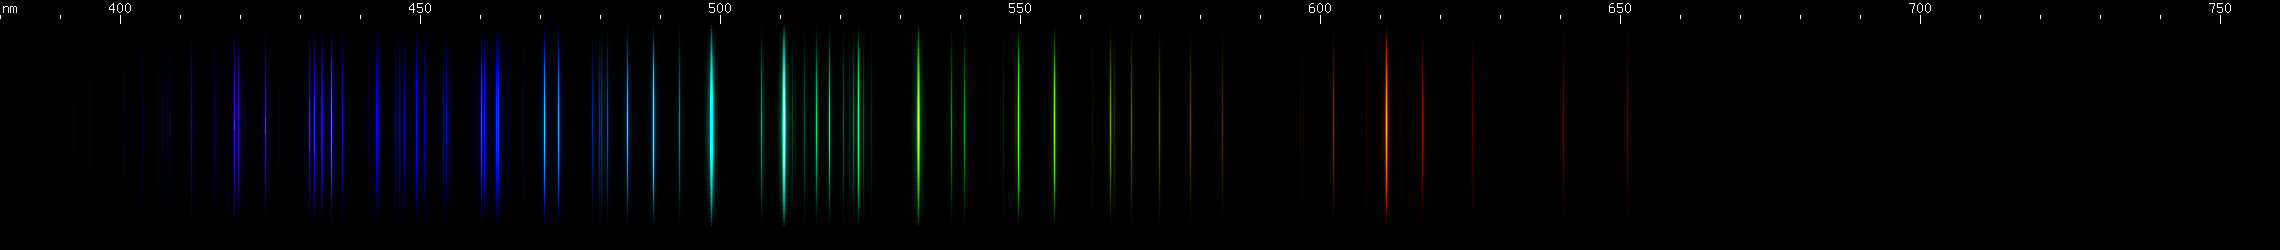 Spectral lines of Arsenic.